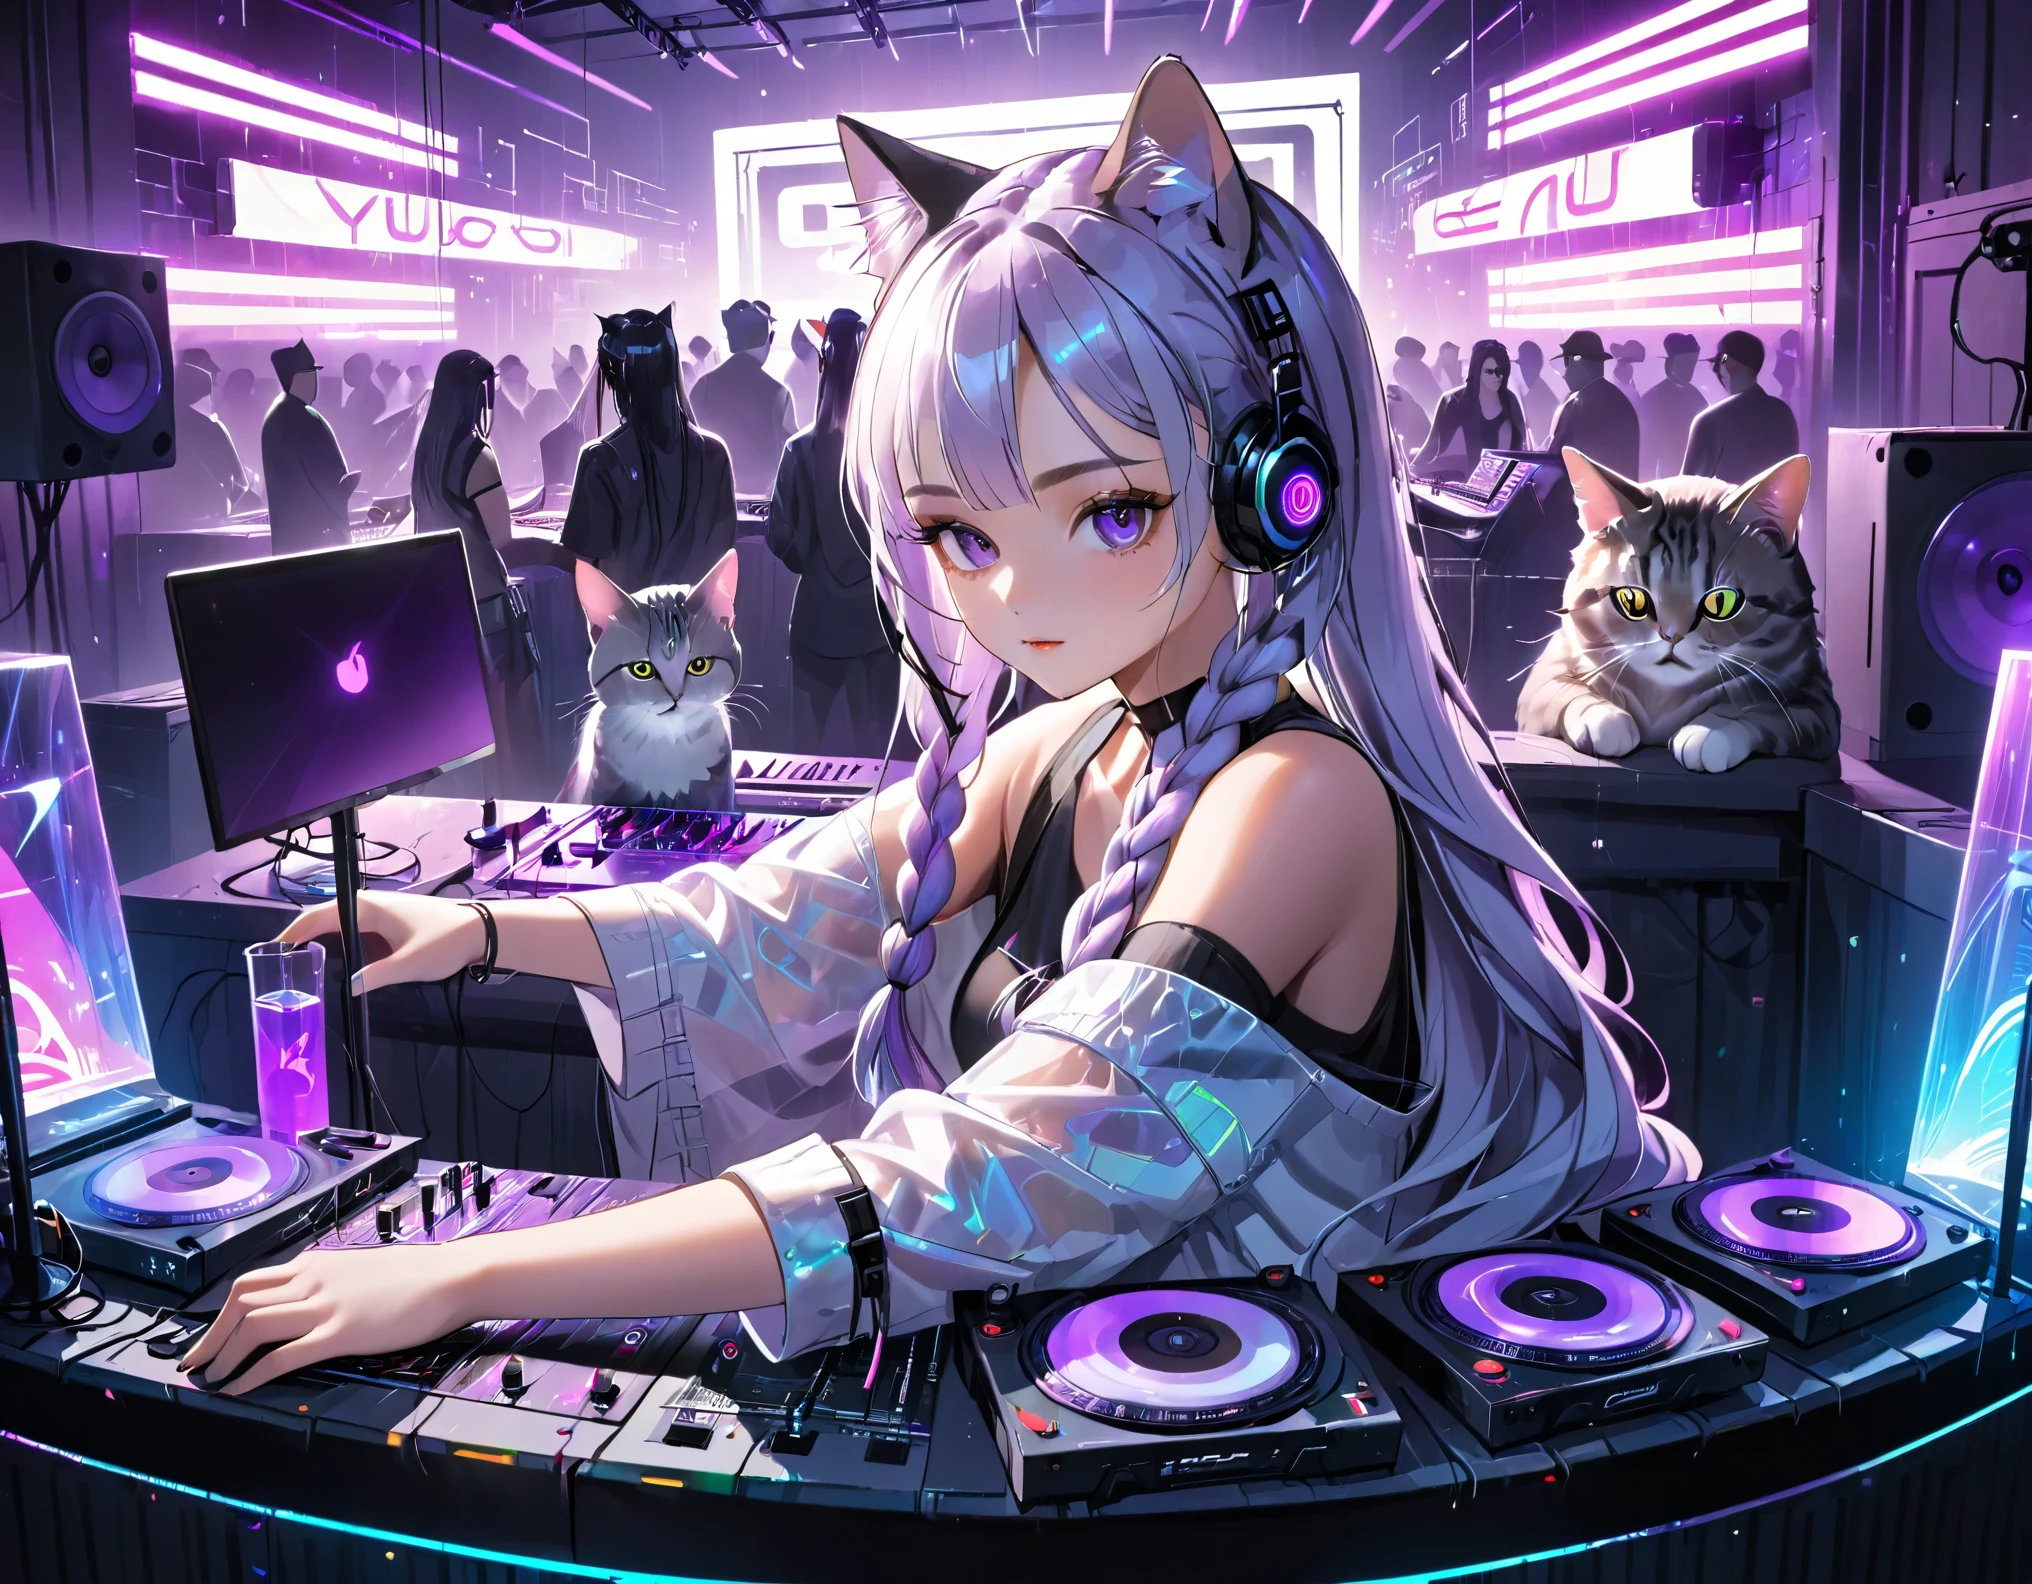 Girl DJing in a club, cyberpunk, White-purple gradient braided long hair twinkling lights, neon holography transparent cat sitting next to DJ equipment.